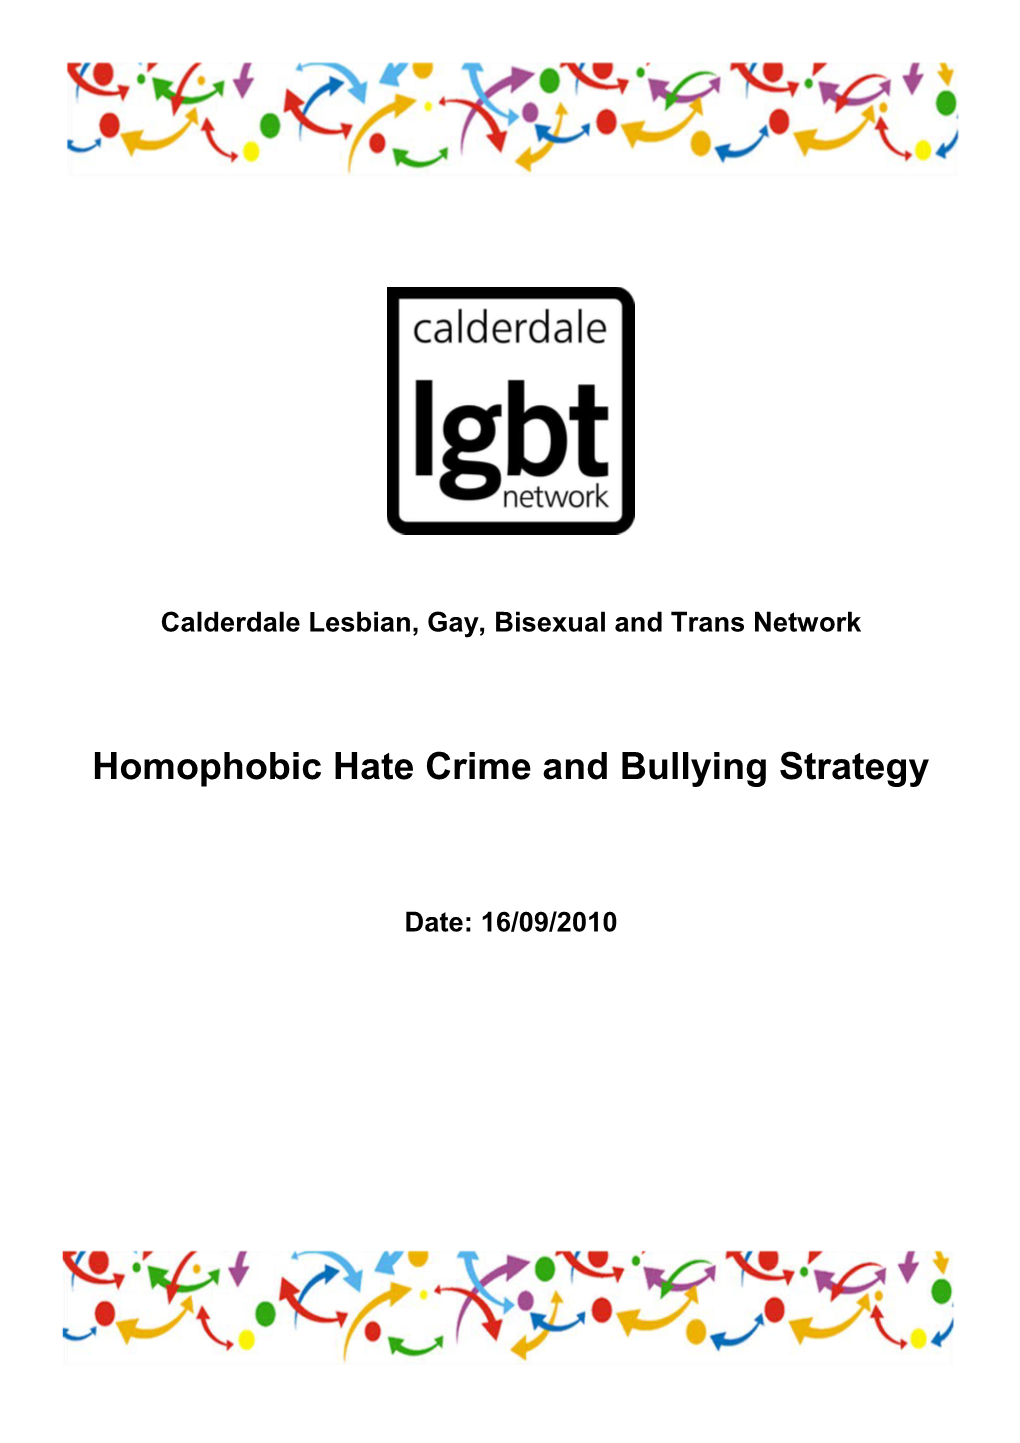 Calderdale Lesbian, Gay, Bisexual and Trans Network